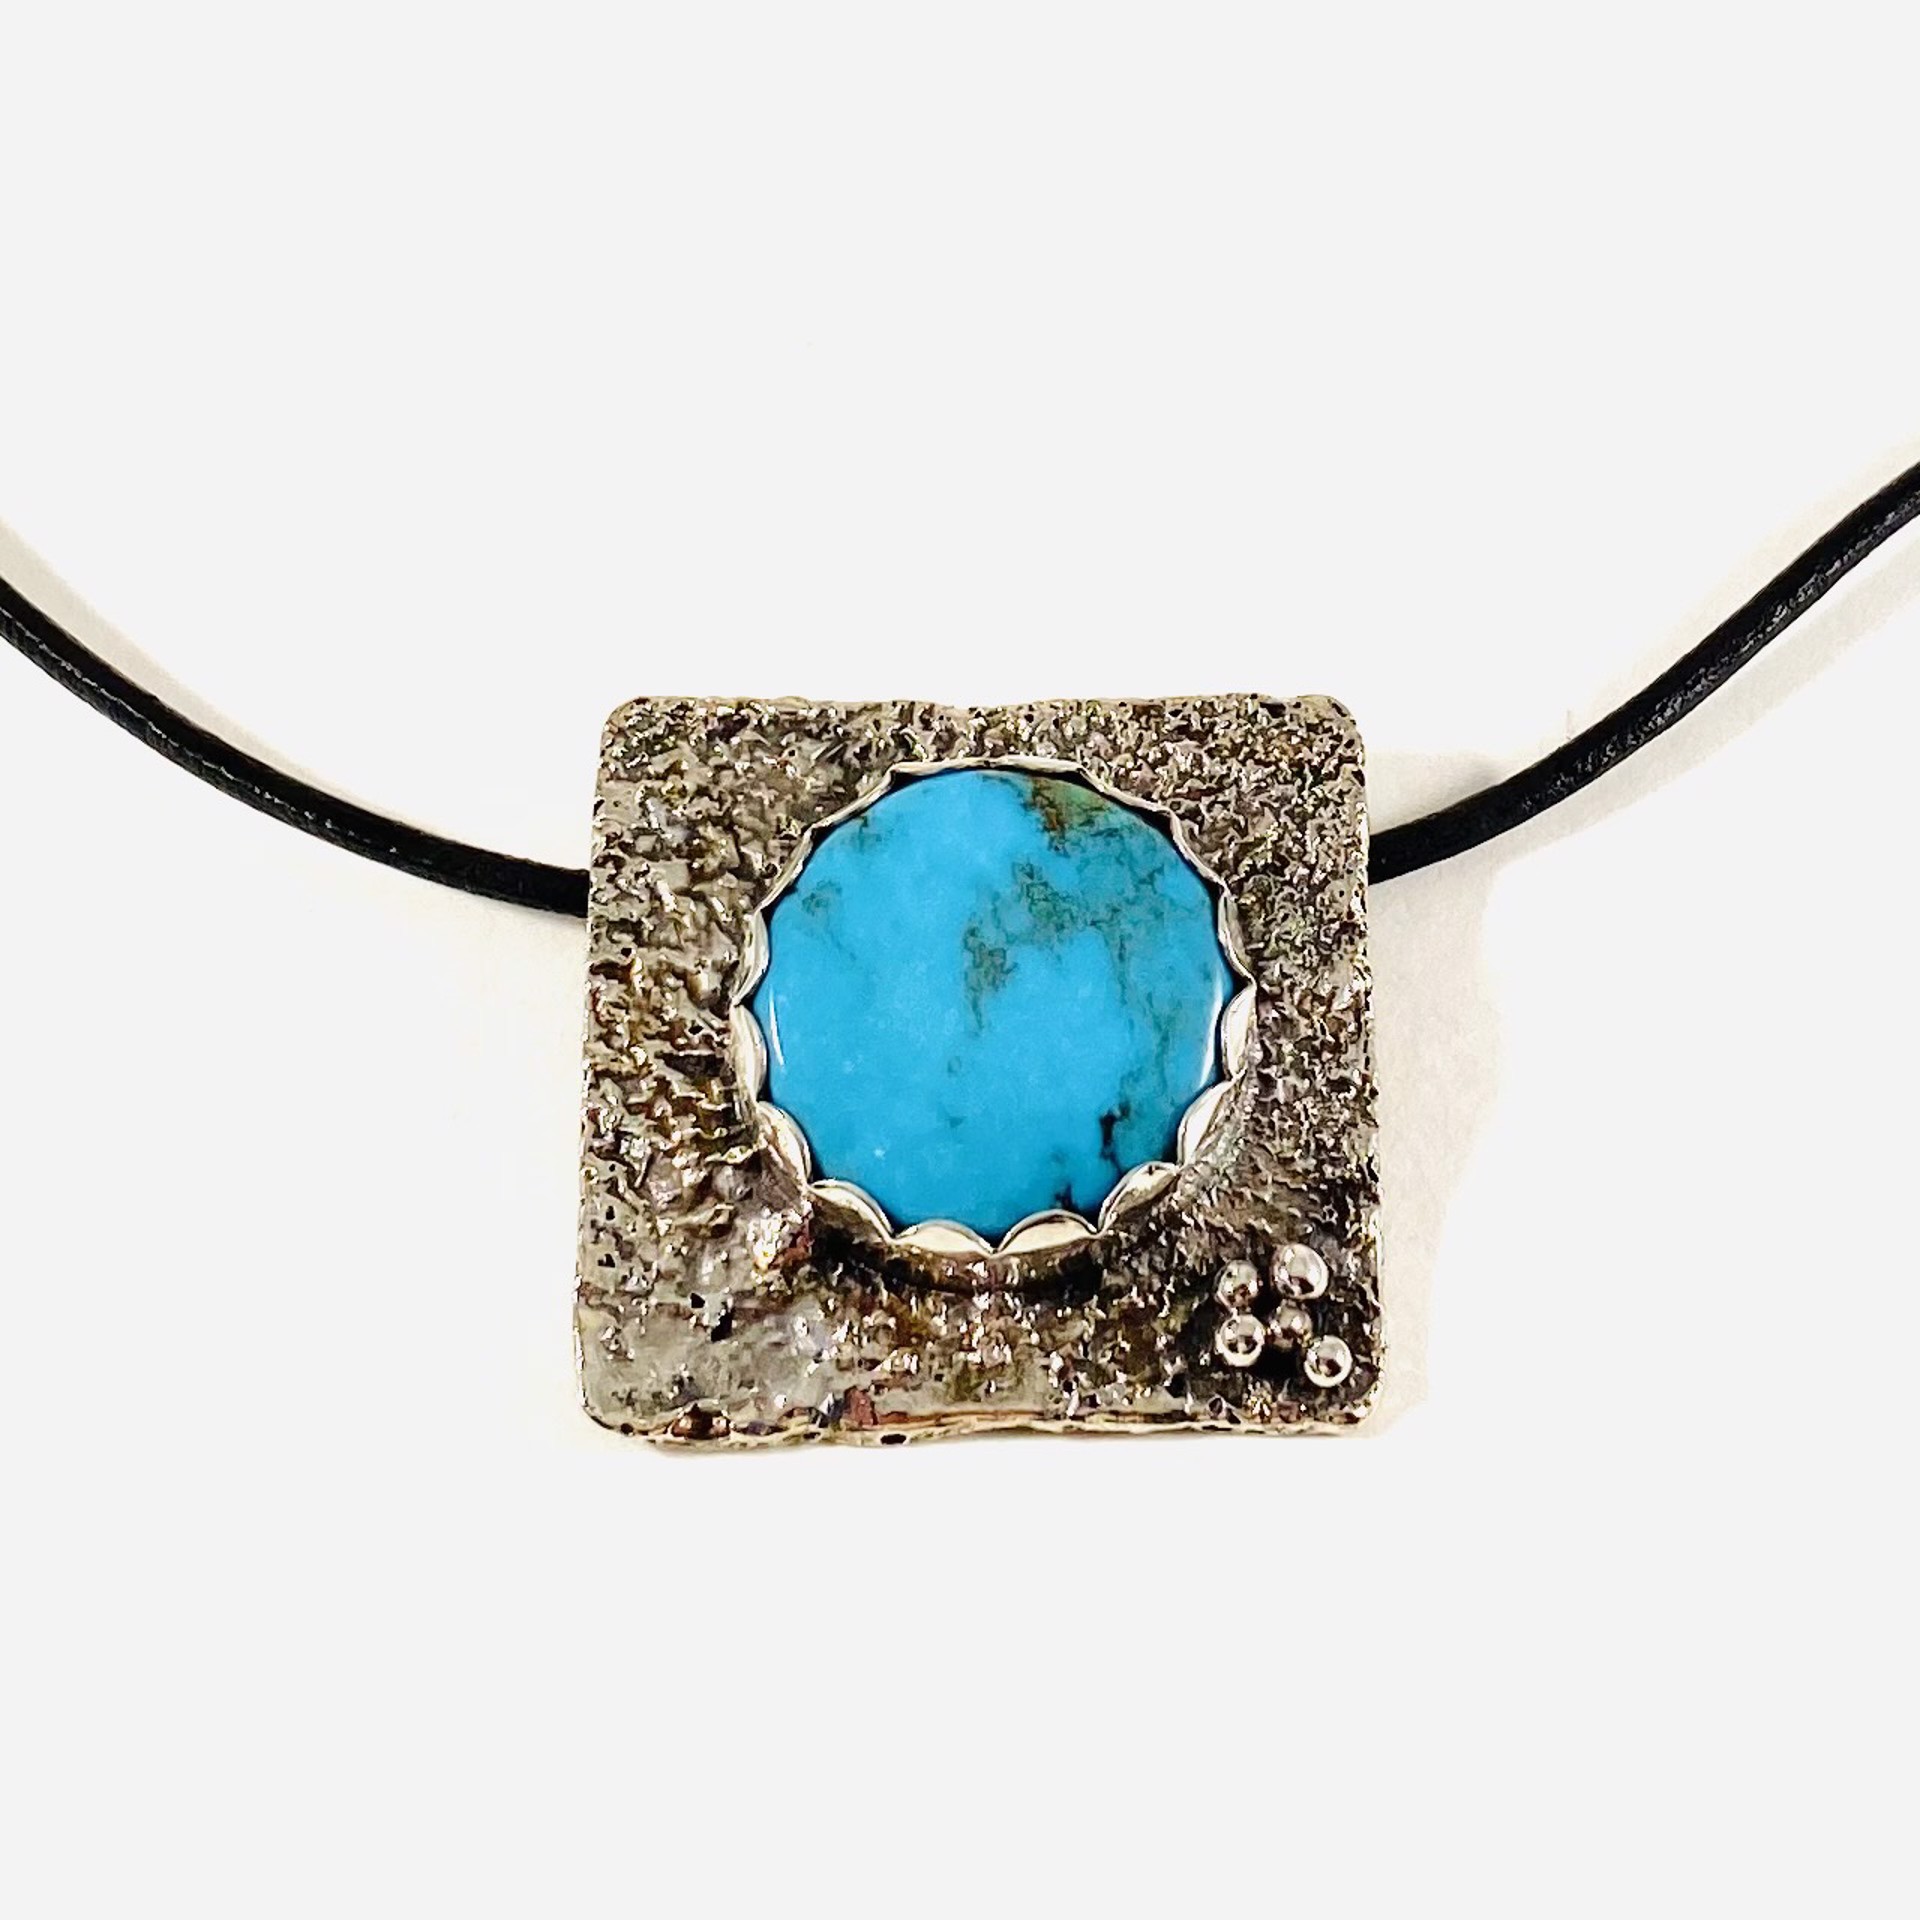 AB21-29 Kingman Turquoise Reticulated Silver Pendant on Leather Necklace by Anne Bivens